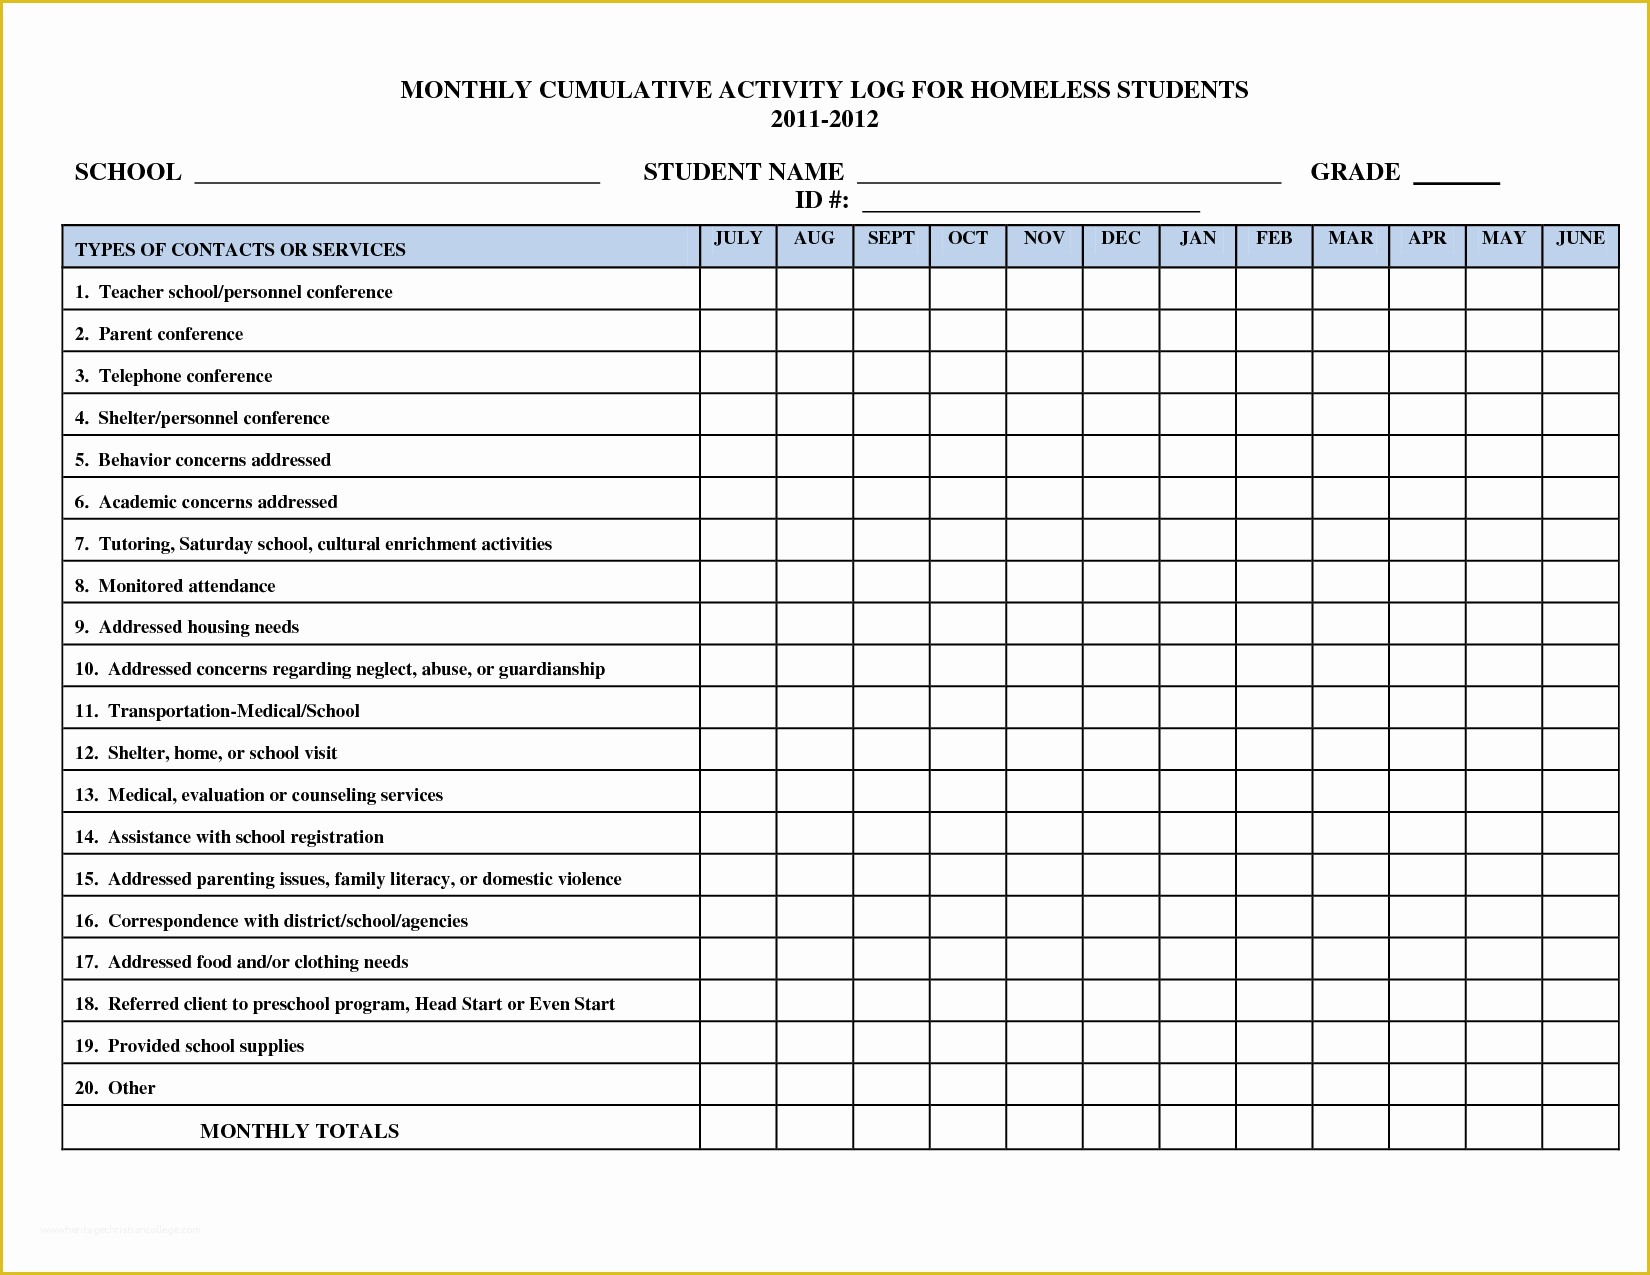 Free Daily Activity Log Template Of Related Keywords & Suggestions for Monthly Activity Log